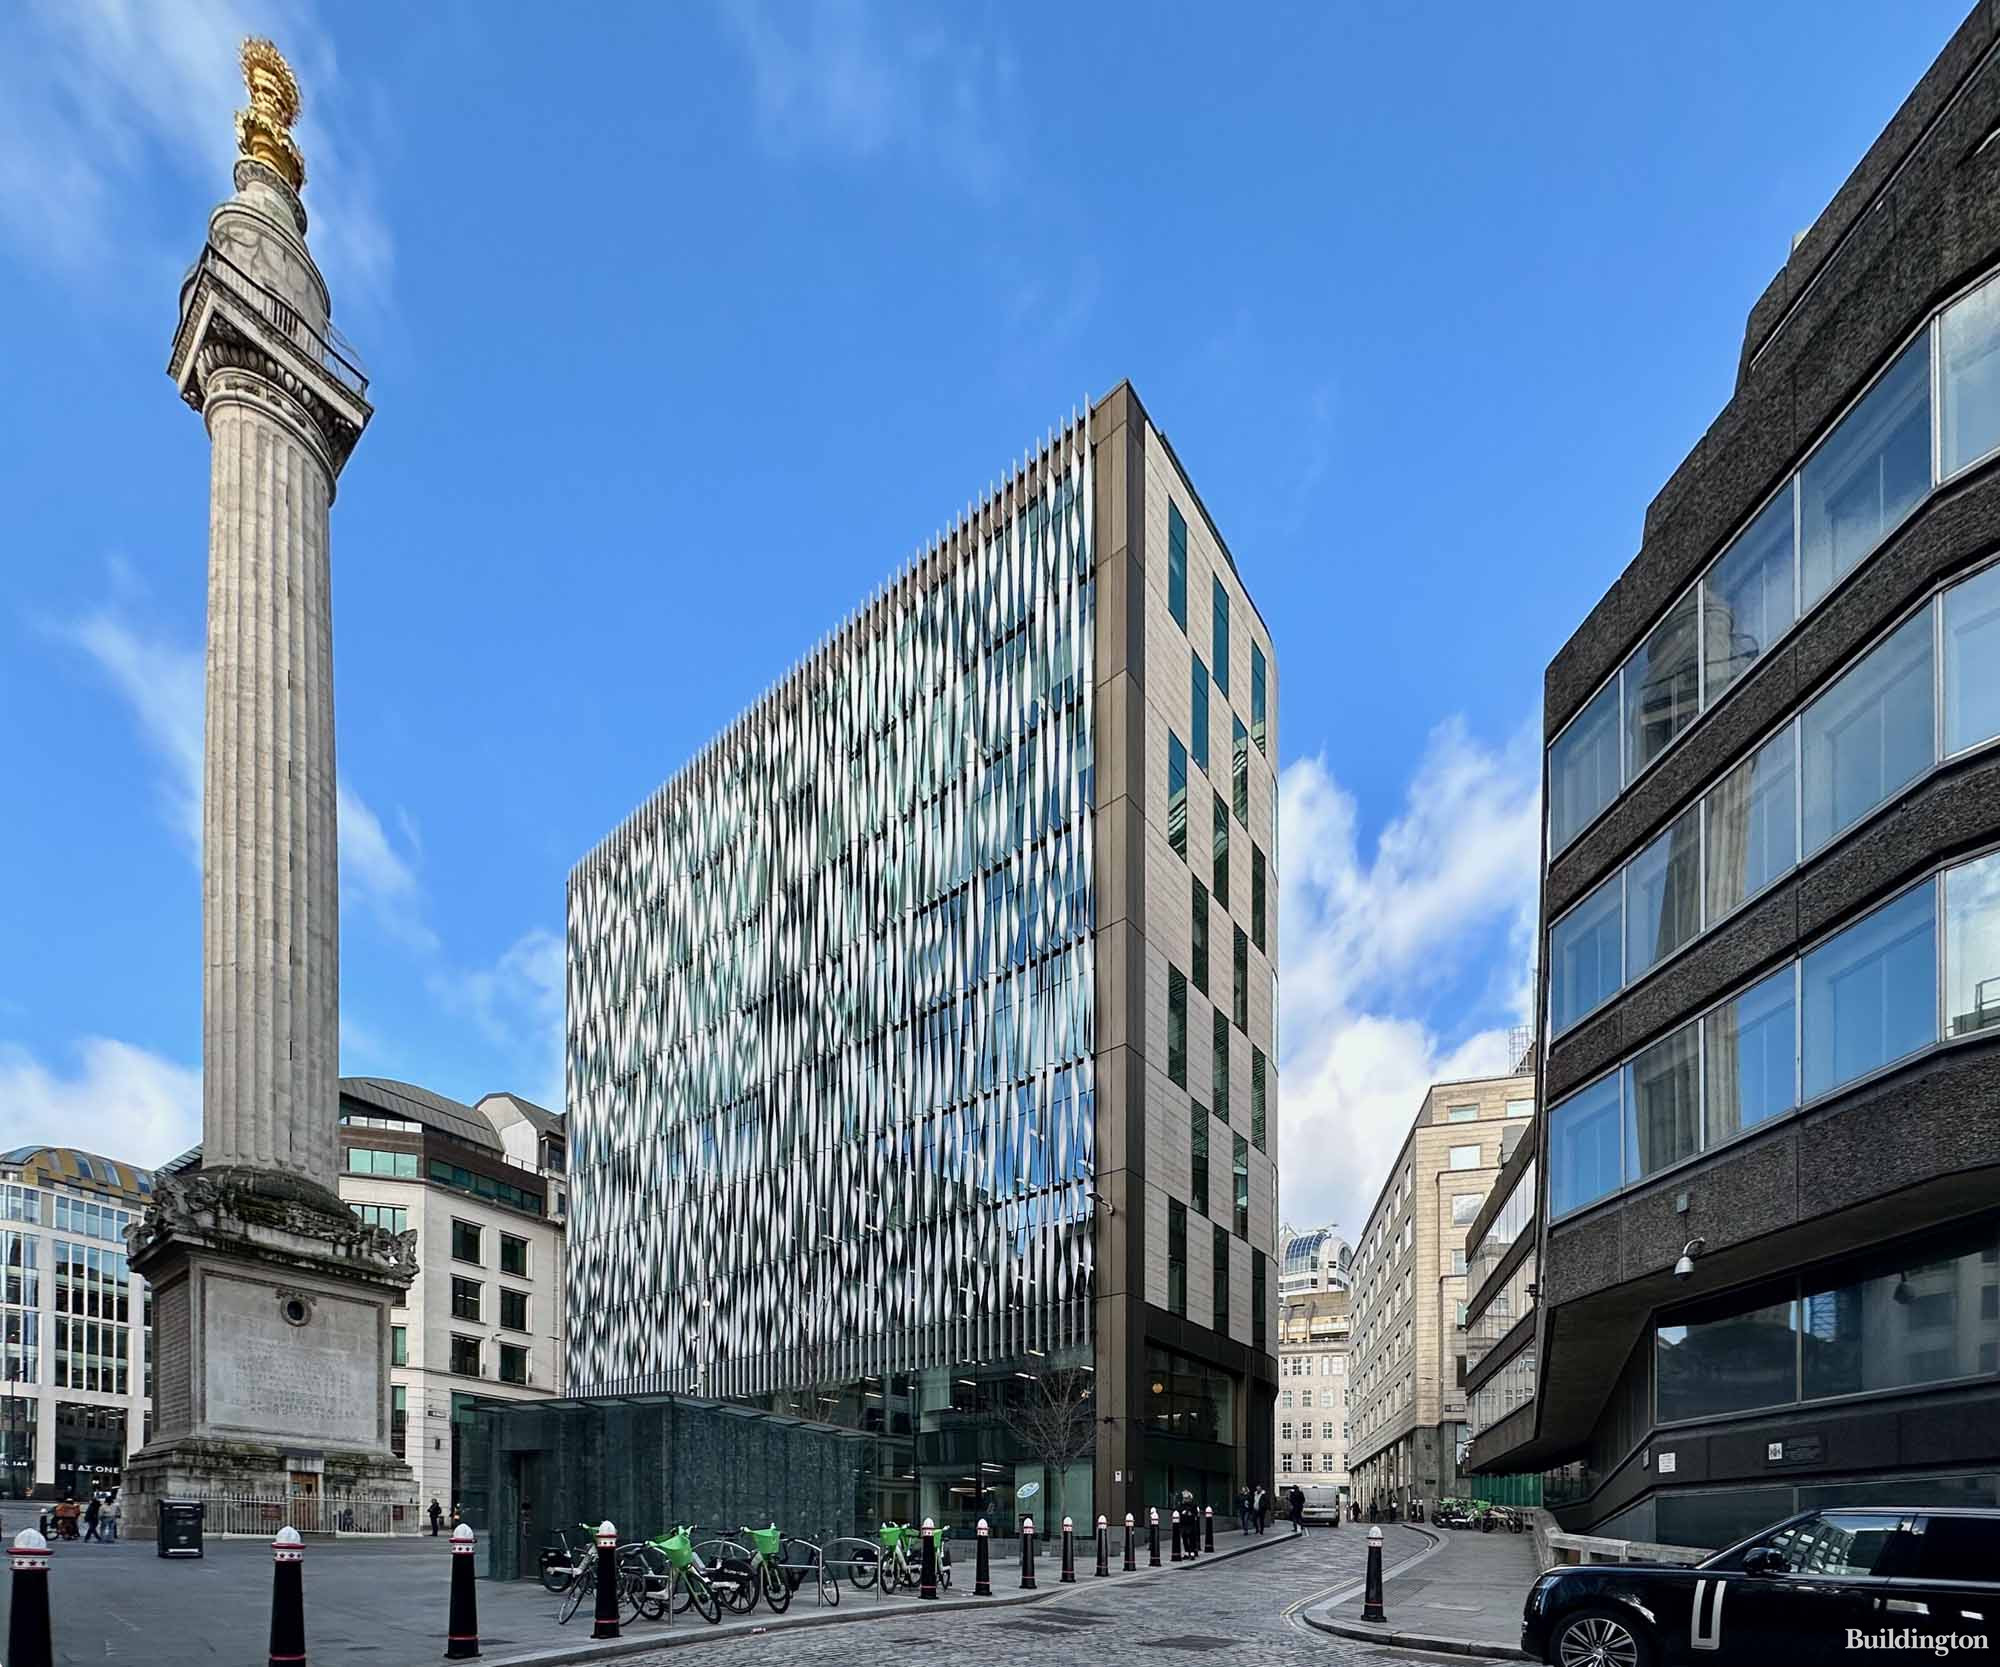 The Monument Building in the City of London EC3